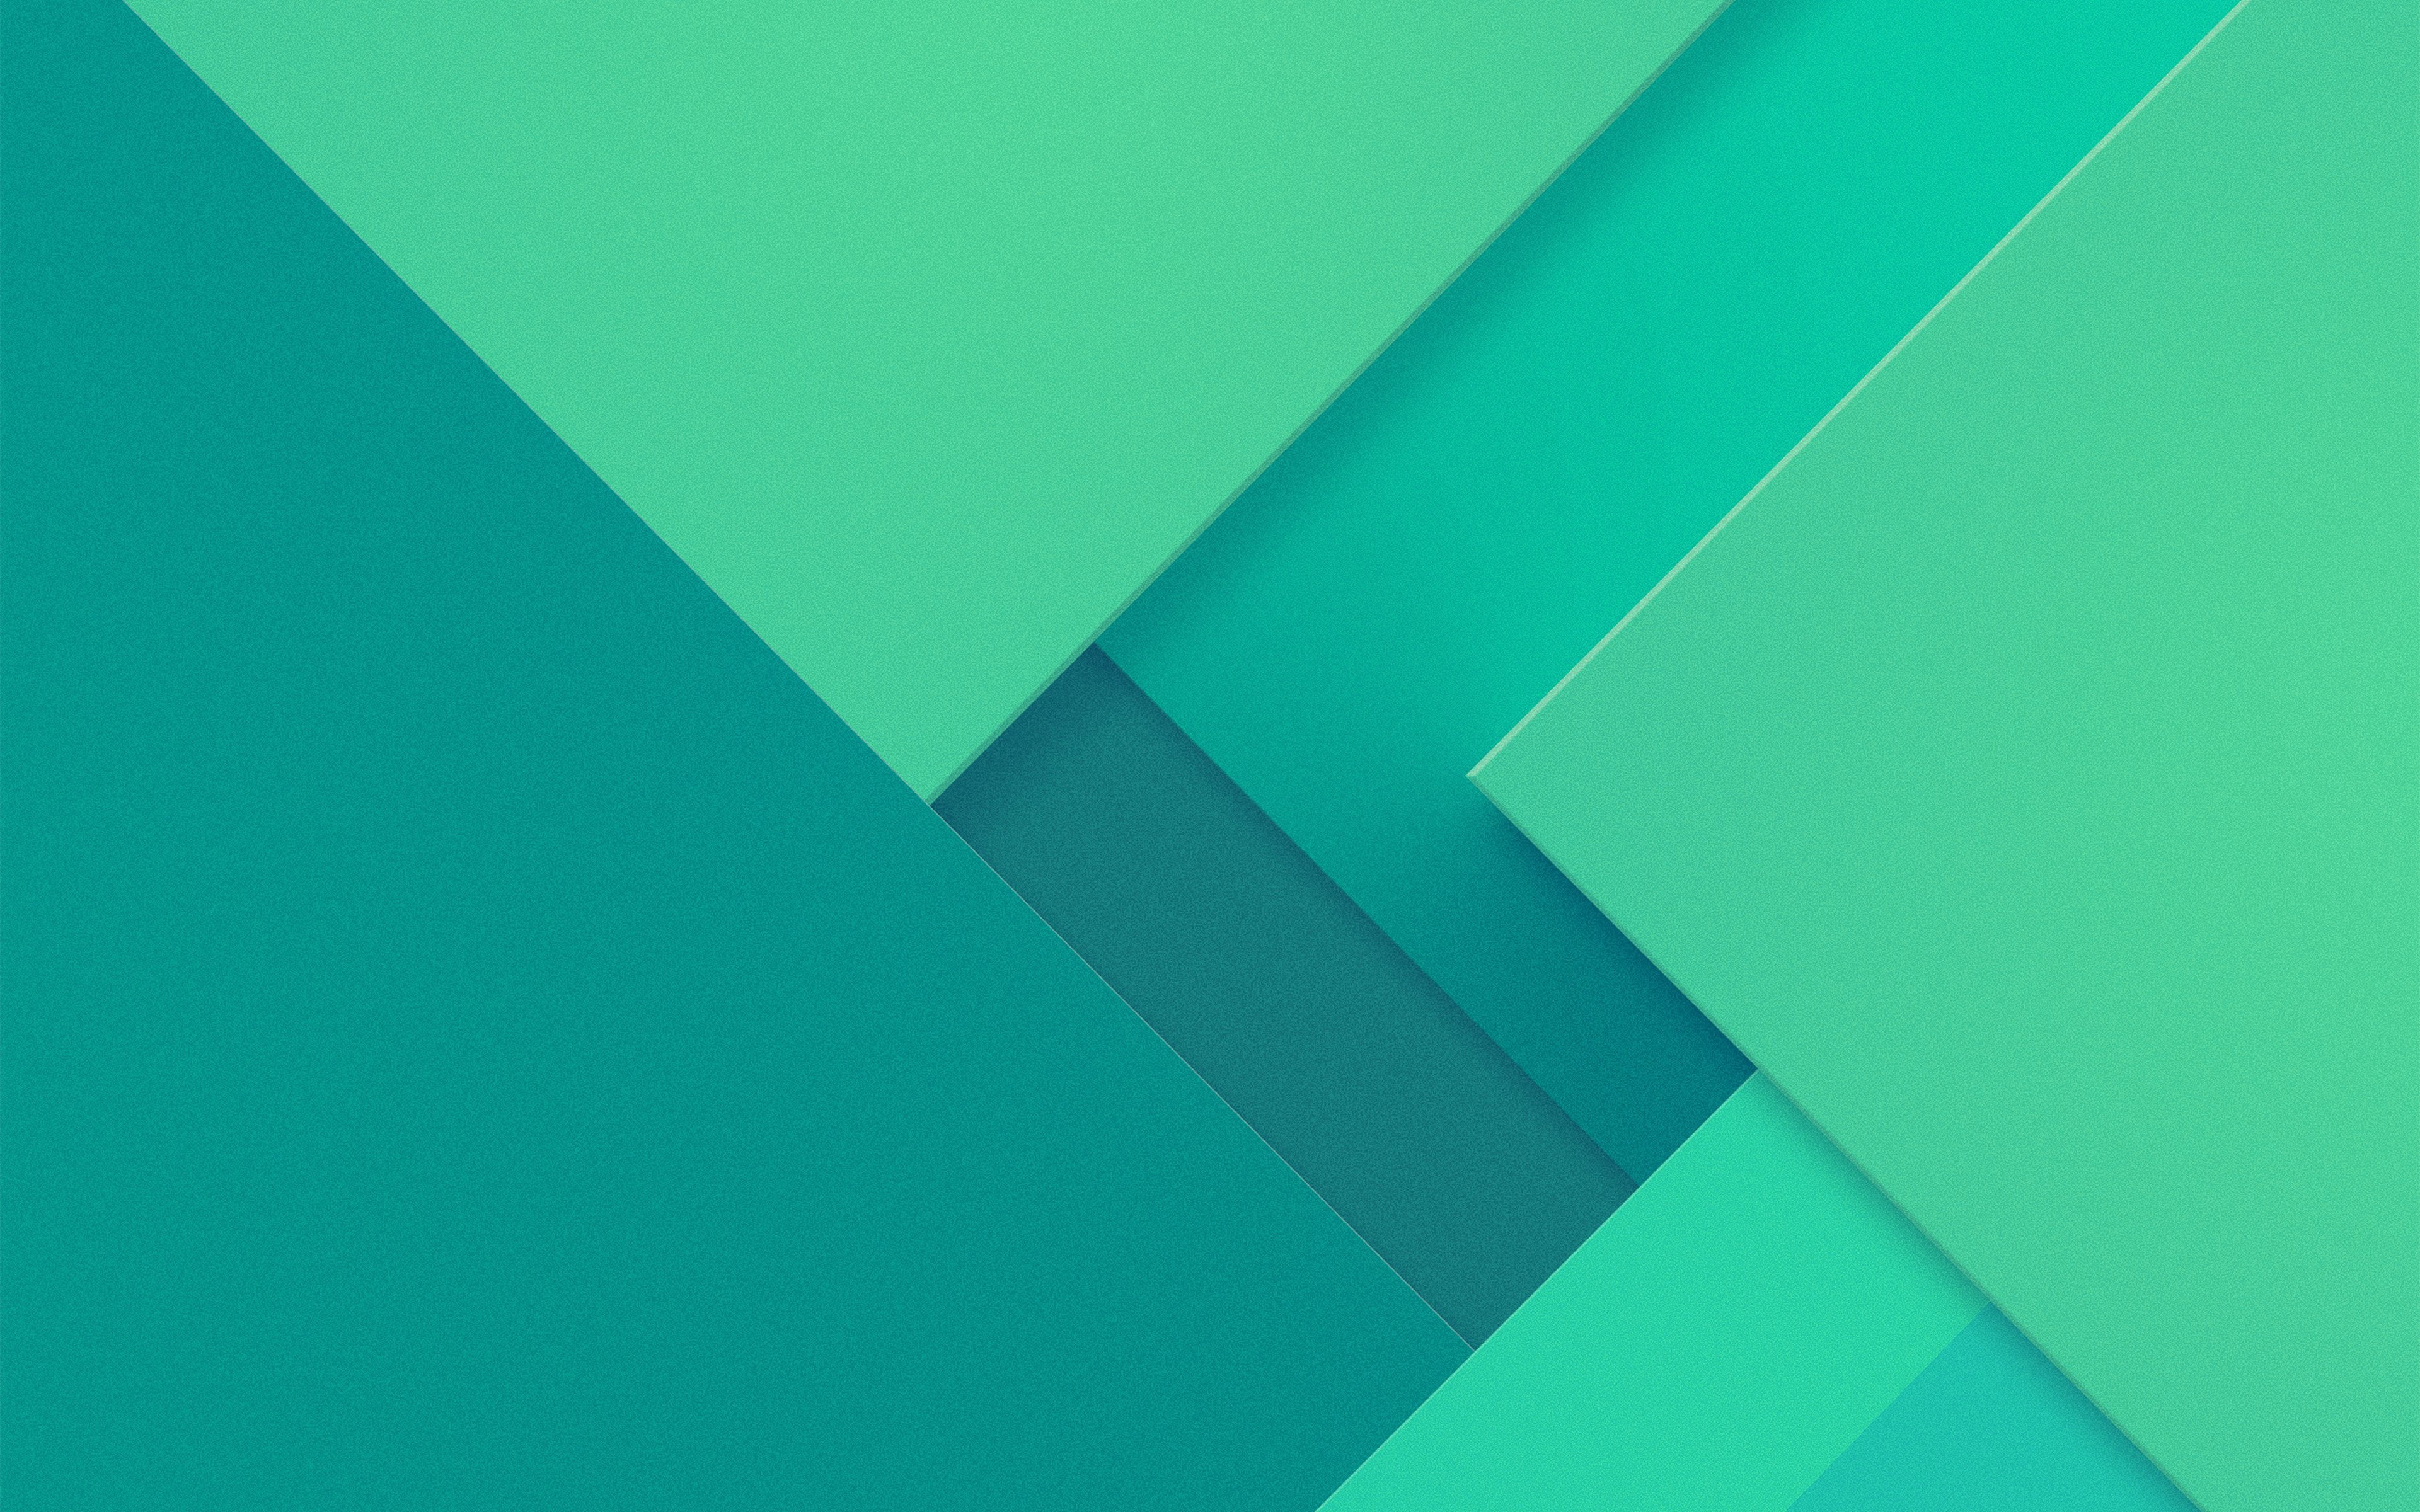 samsung, galaxy, 7, edge, green, abstract, pattern, backgrounds